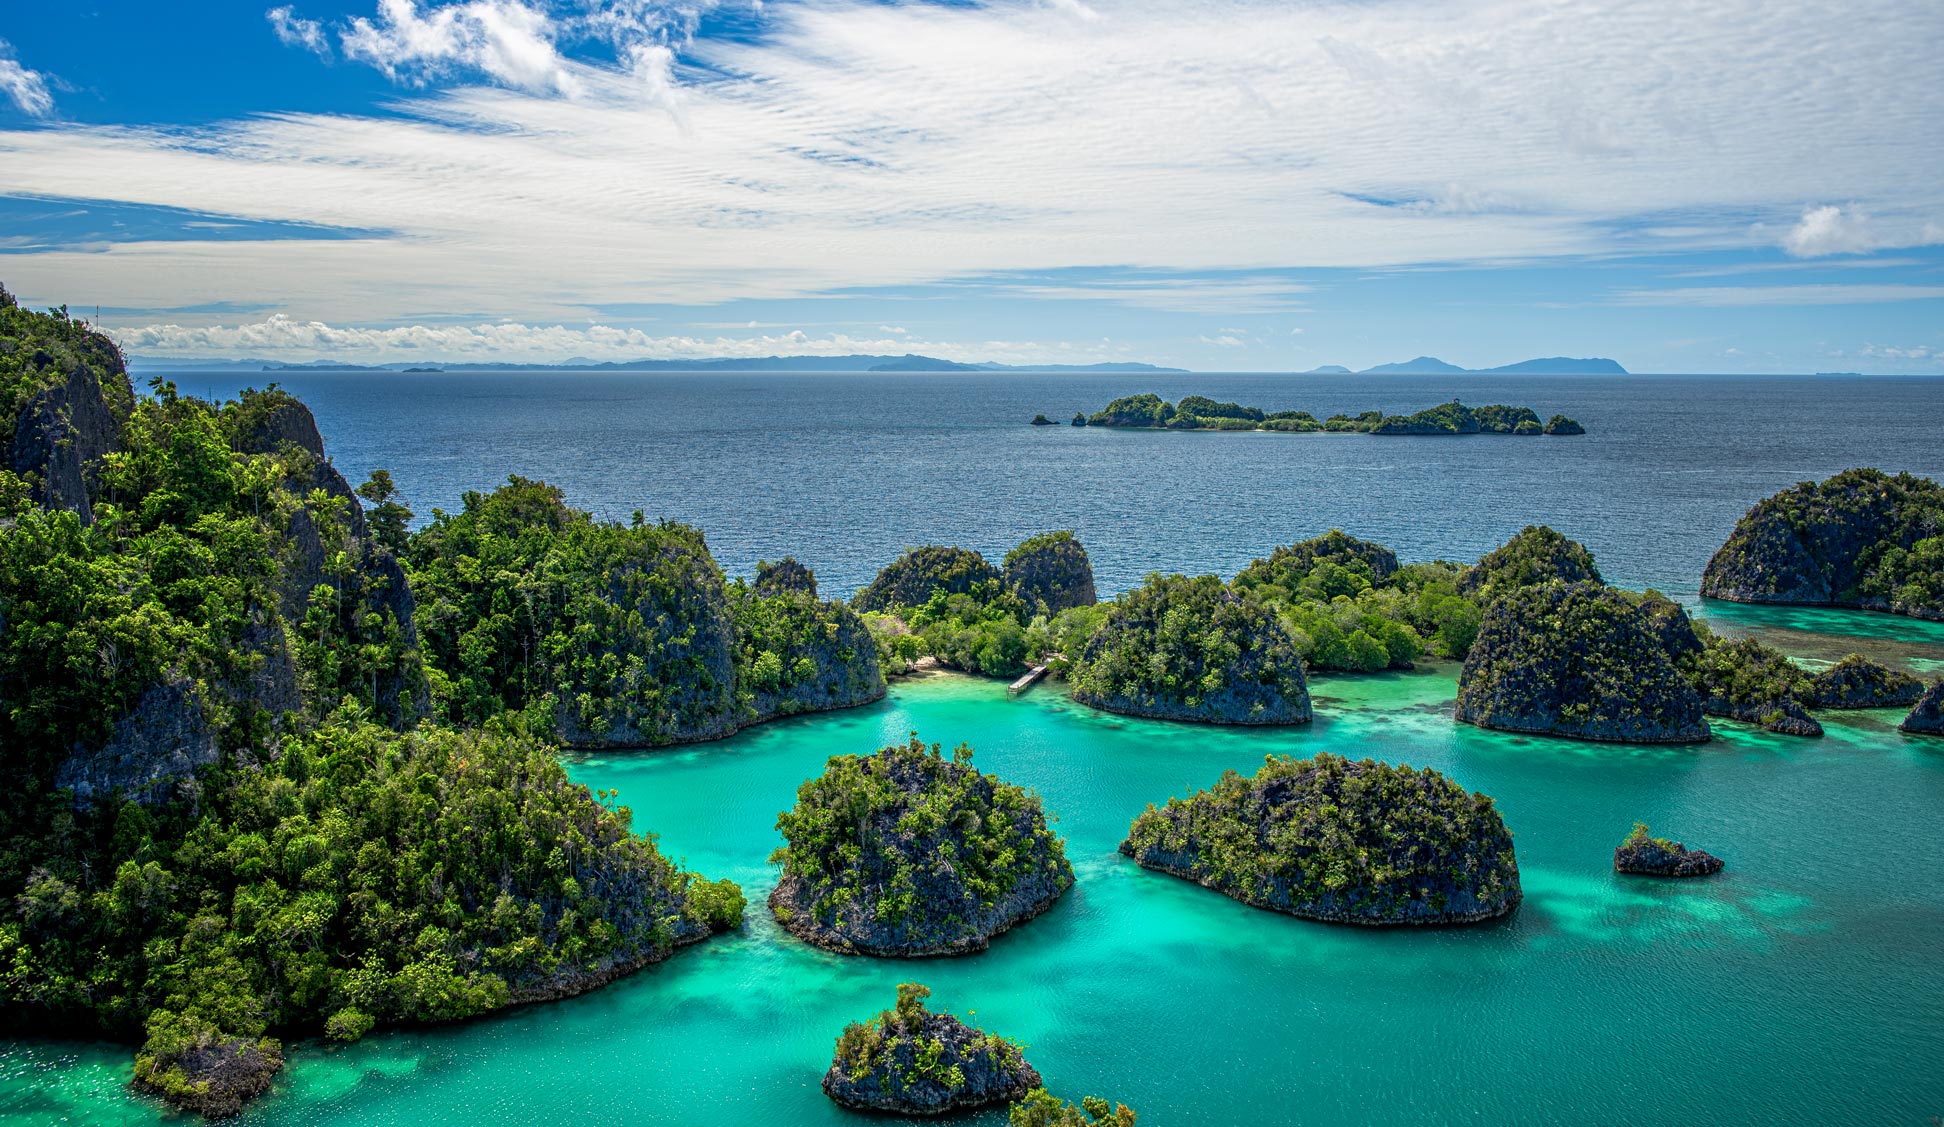 Indonesia: A Tropical Paradise of Islands and Diversity